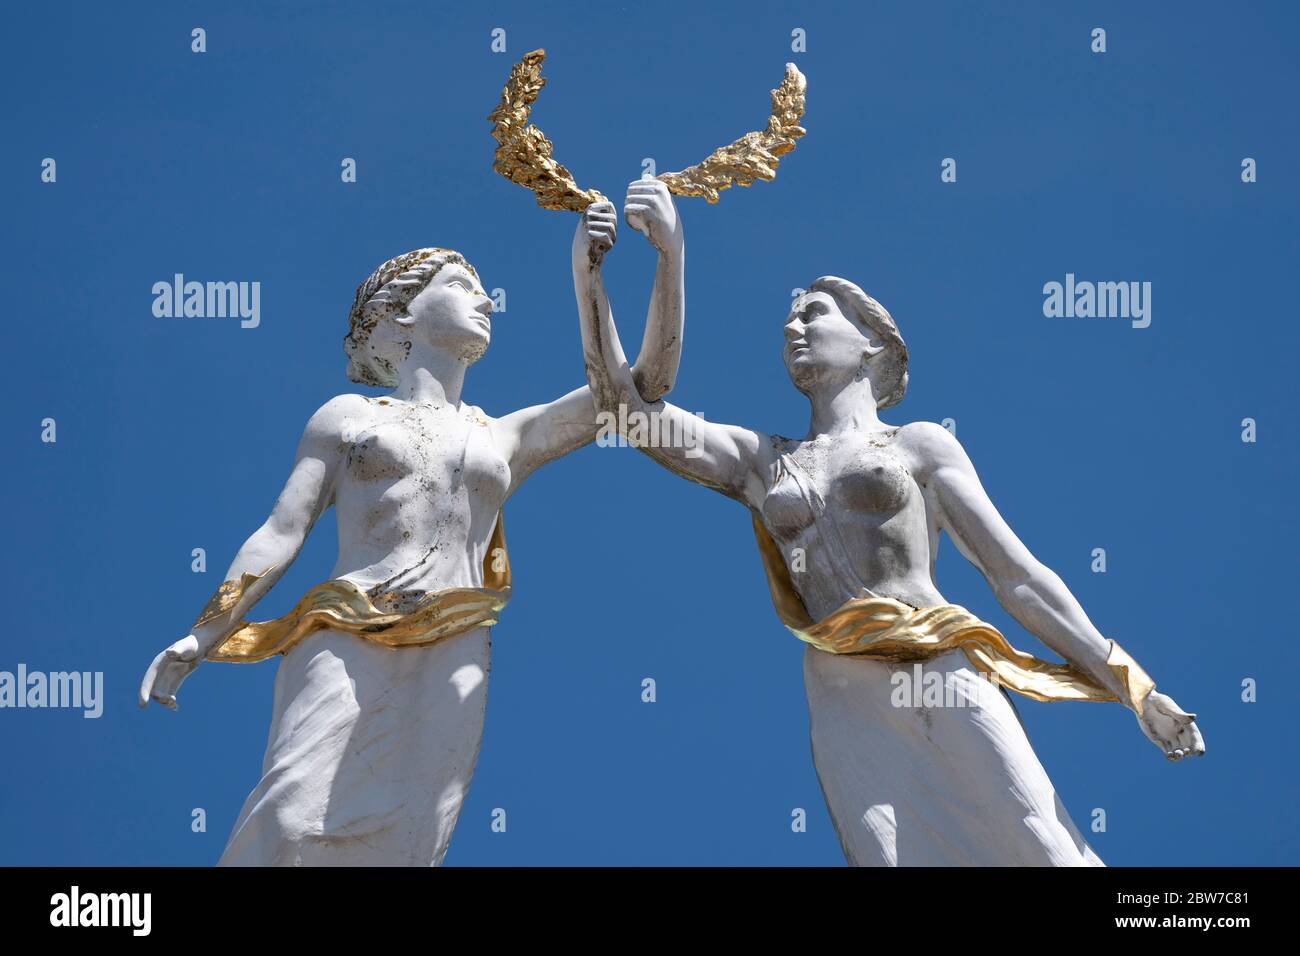 Manchester, UK. 29th May, 2020. Picture shows a statues at the the INTU Trafford Centre in Manchester which has released details about how it will saf Stock Photo